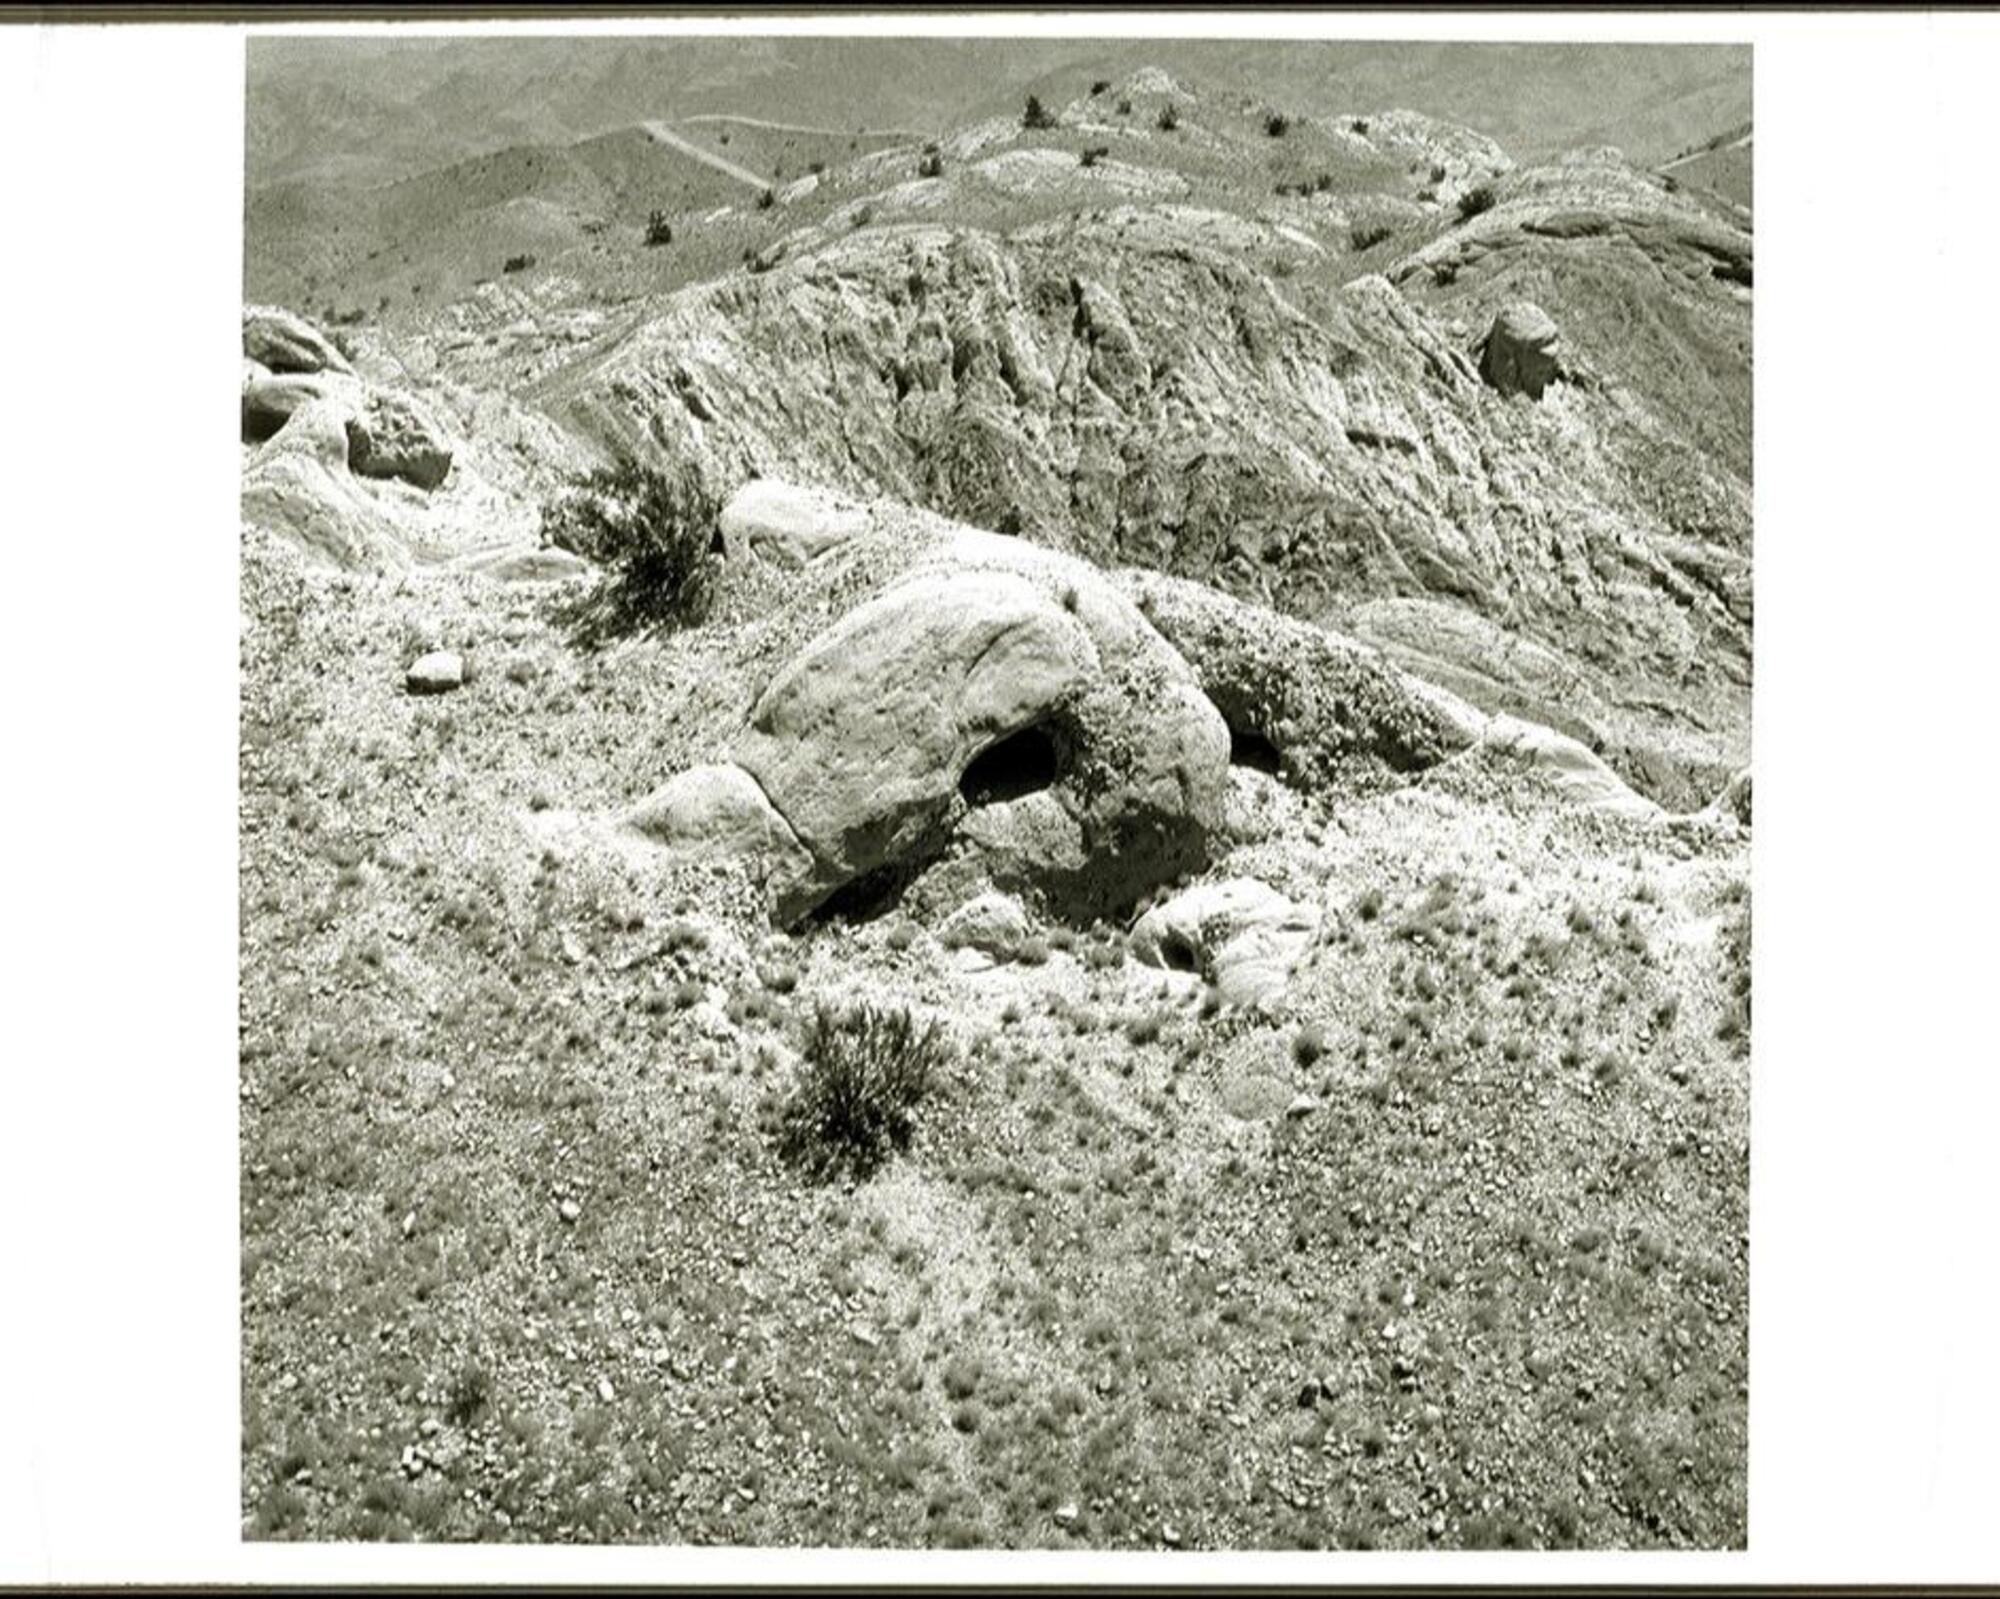 This is a black and white photograph depicting a rocky hillside in a barren landscape. There are craggy peaks in the background and some scrub type vegetation. The viewpoint is from above looking down.